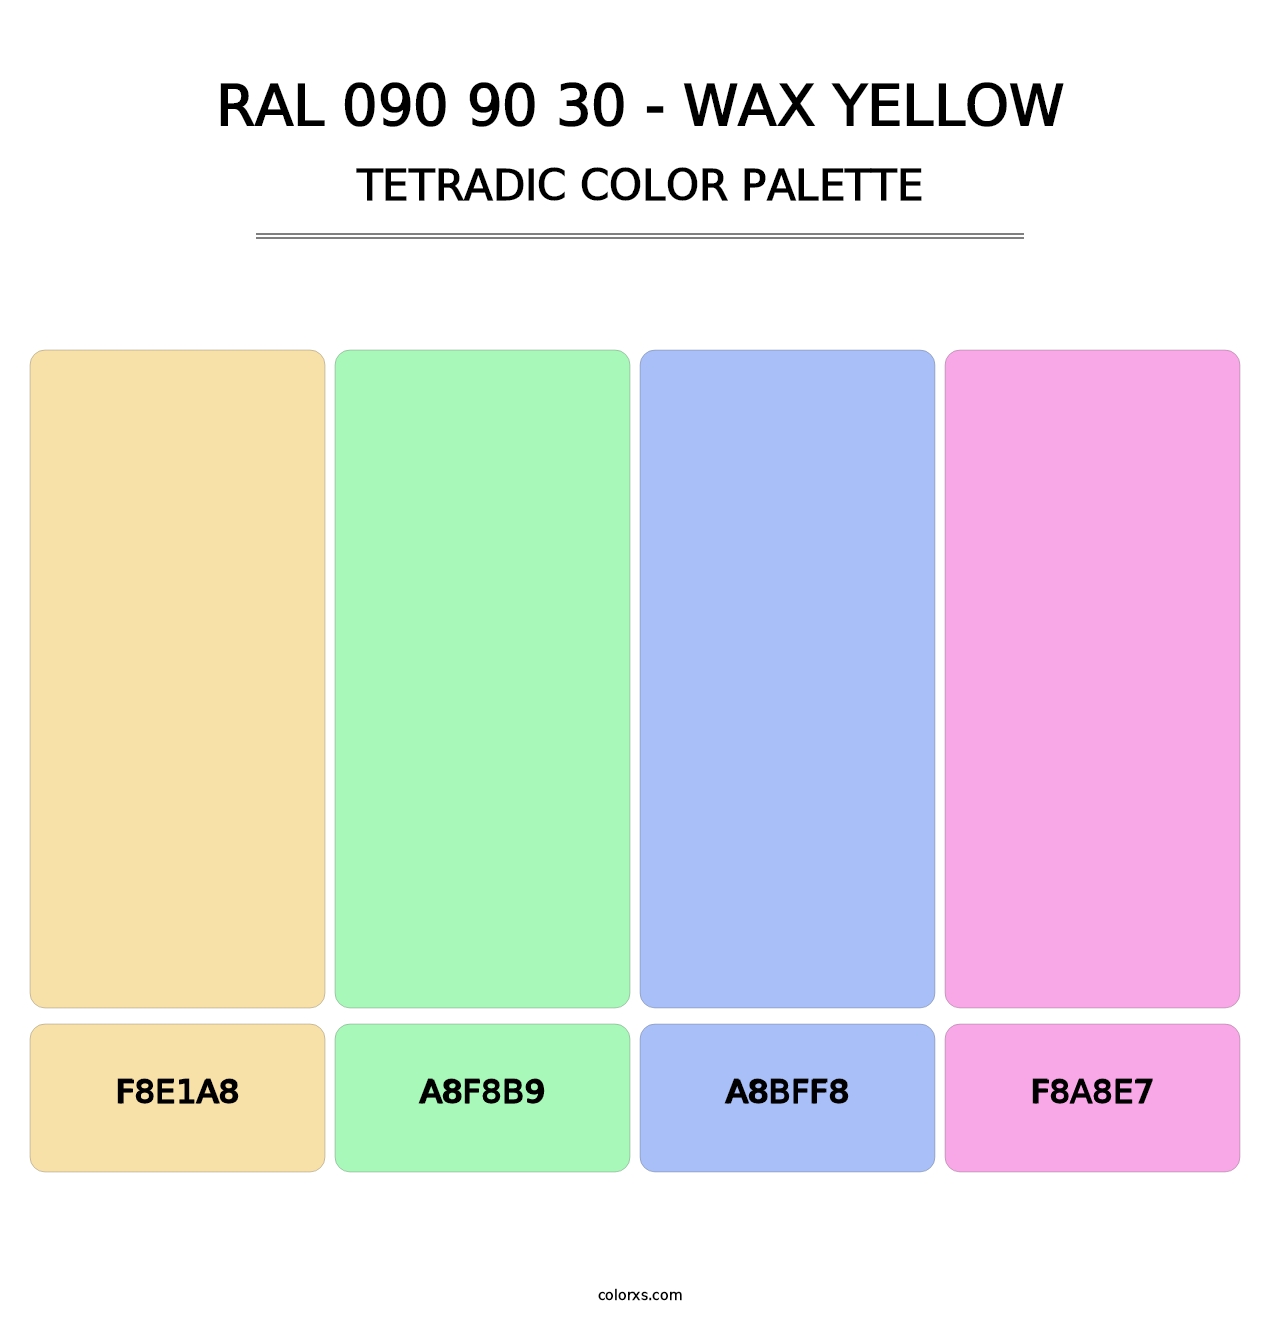 RAL 090 90 30 - Wax Yellow - Tetradic Color Palette